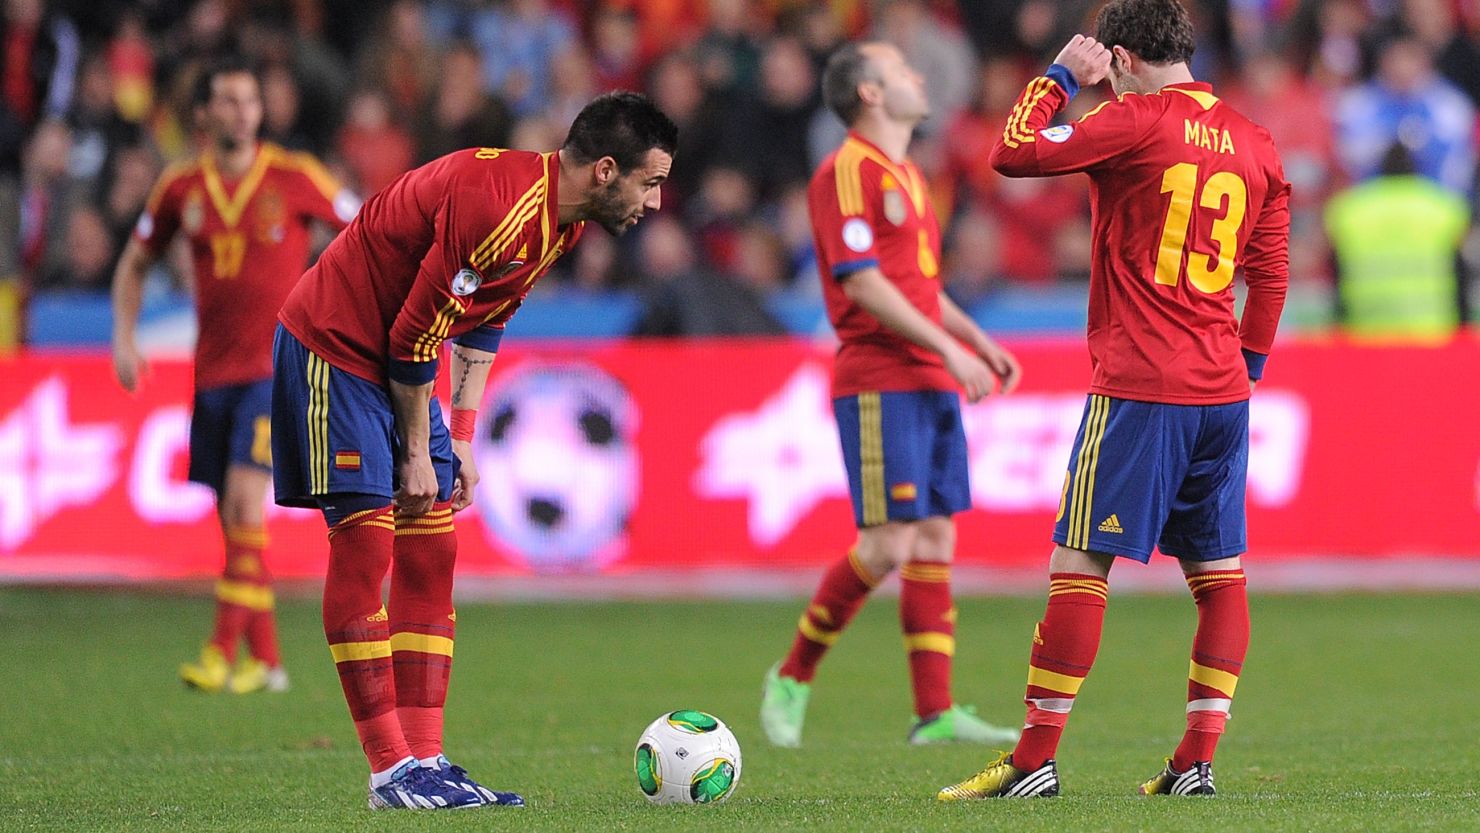 Spain's players show their disappointment after conceding a late equalizer at home to Finland in a World Cup qualifier in Gijon.  